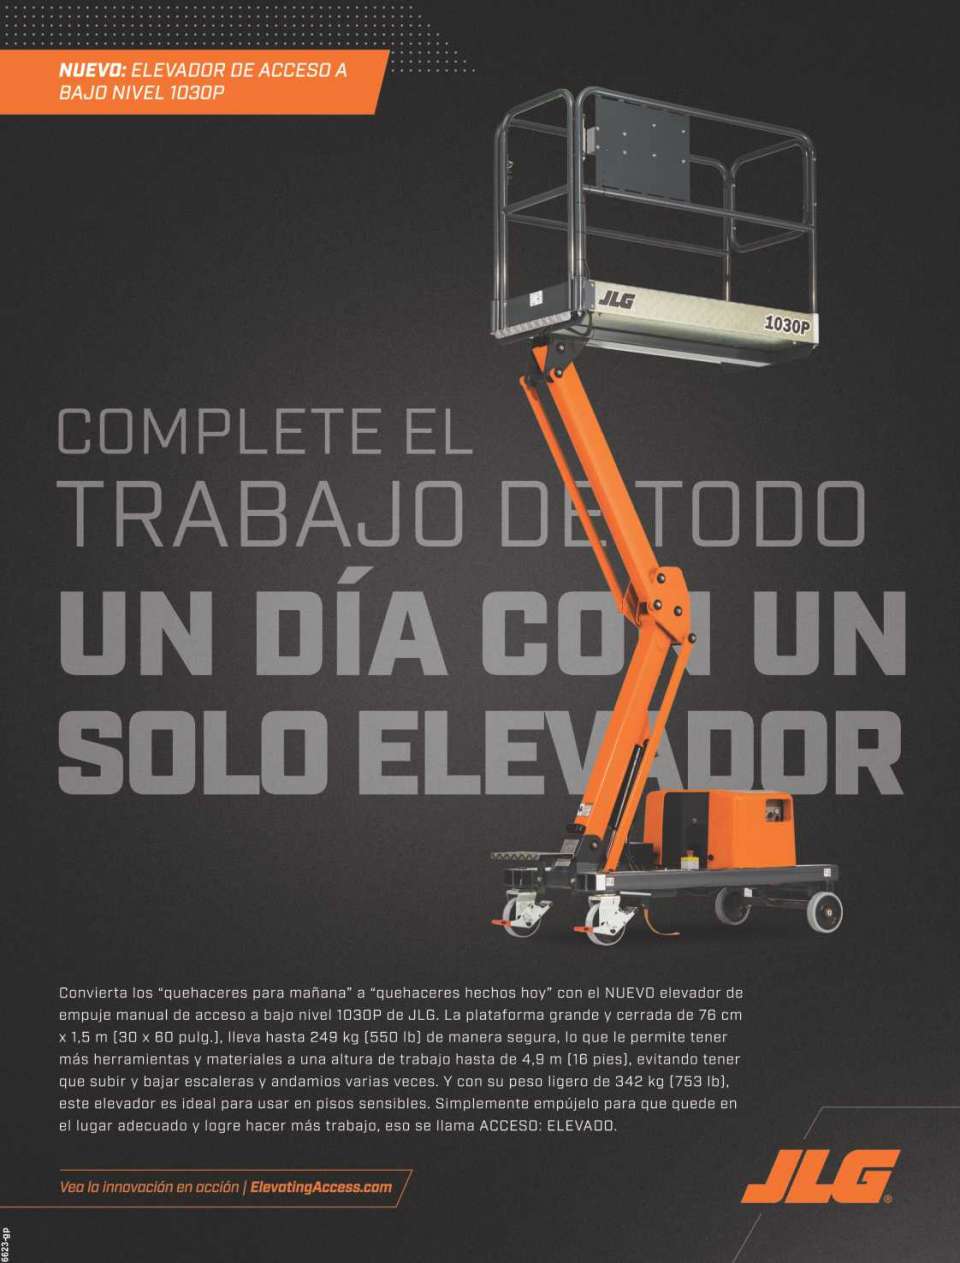 JLG presents the future in Lifting Platforms. We are Elevating Access. JLG reveals the next generation of the access industry. New platform 1030P